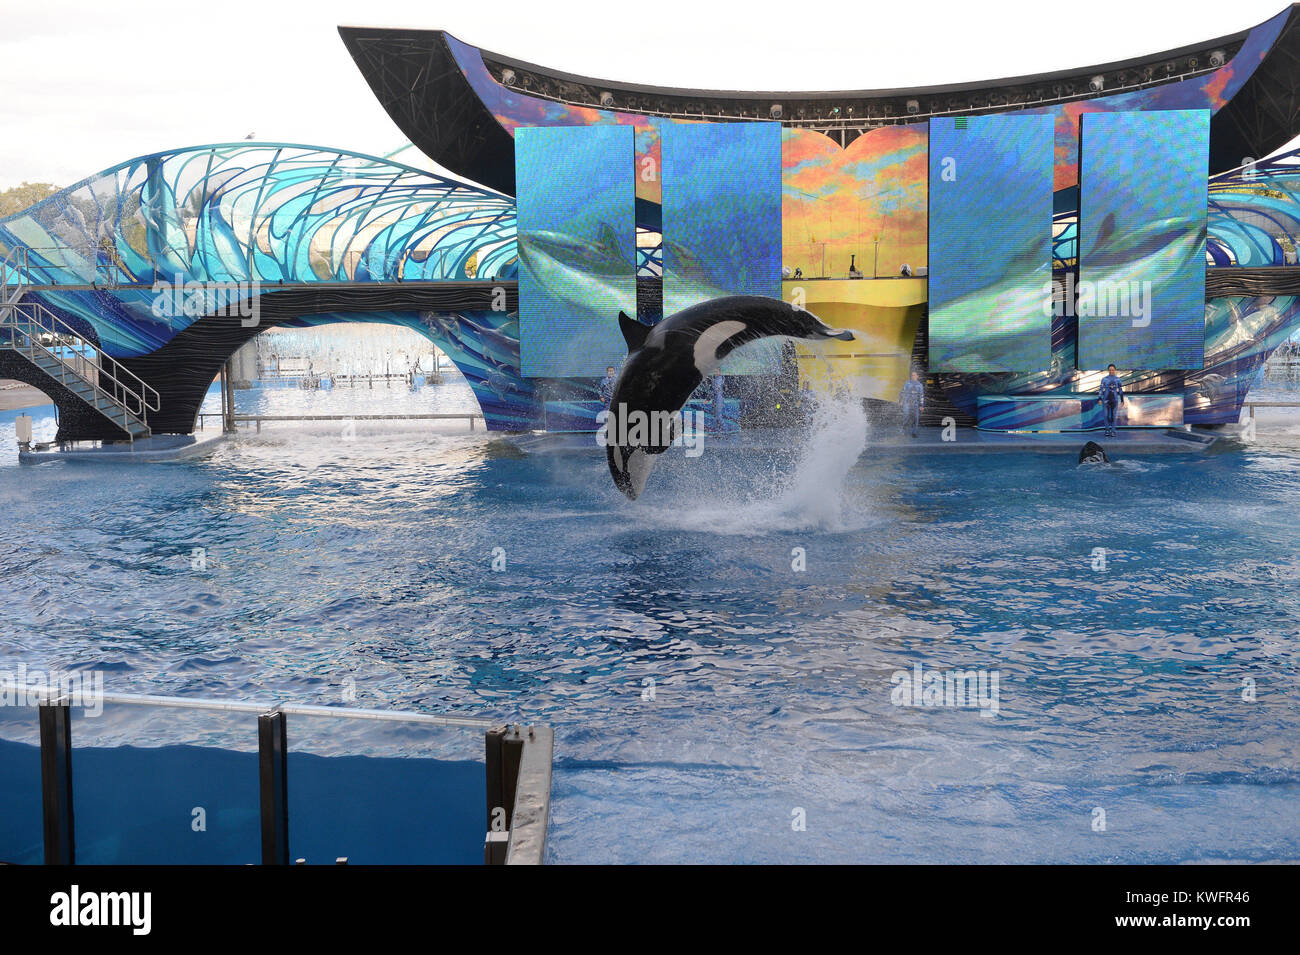 ORLANDO, FL - AUGUST 15: SeaWorld has announced a new 10 million-gallon killer whale environment in San Diego, nearly double the size of the existing facility. Similar environments are planned for SeaWorld Orlando and SeaWorld San Antonio, the company said on Friday. The new facility measures 350 feet across and 50 feet deep, a size that SeaWorld says will Òsupport the whales' broad range of behaviors and provide choices that can challenge the whales both physically and mentally.Ó SeaWorld also pledged $10 million in matching funds for orca research. The company's stock plummeted 33 percent on Stock Photo